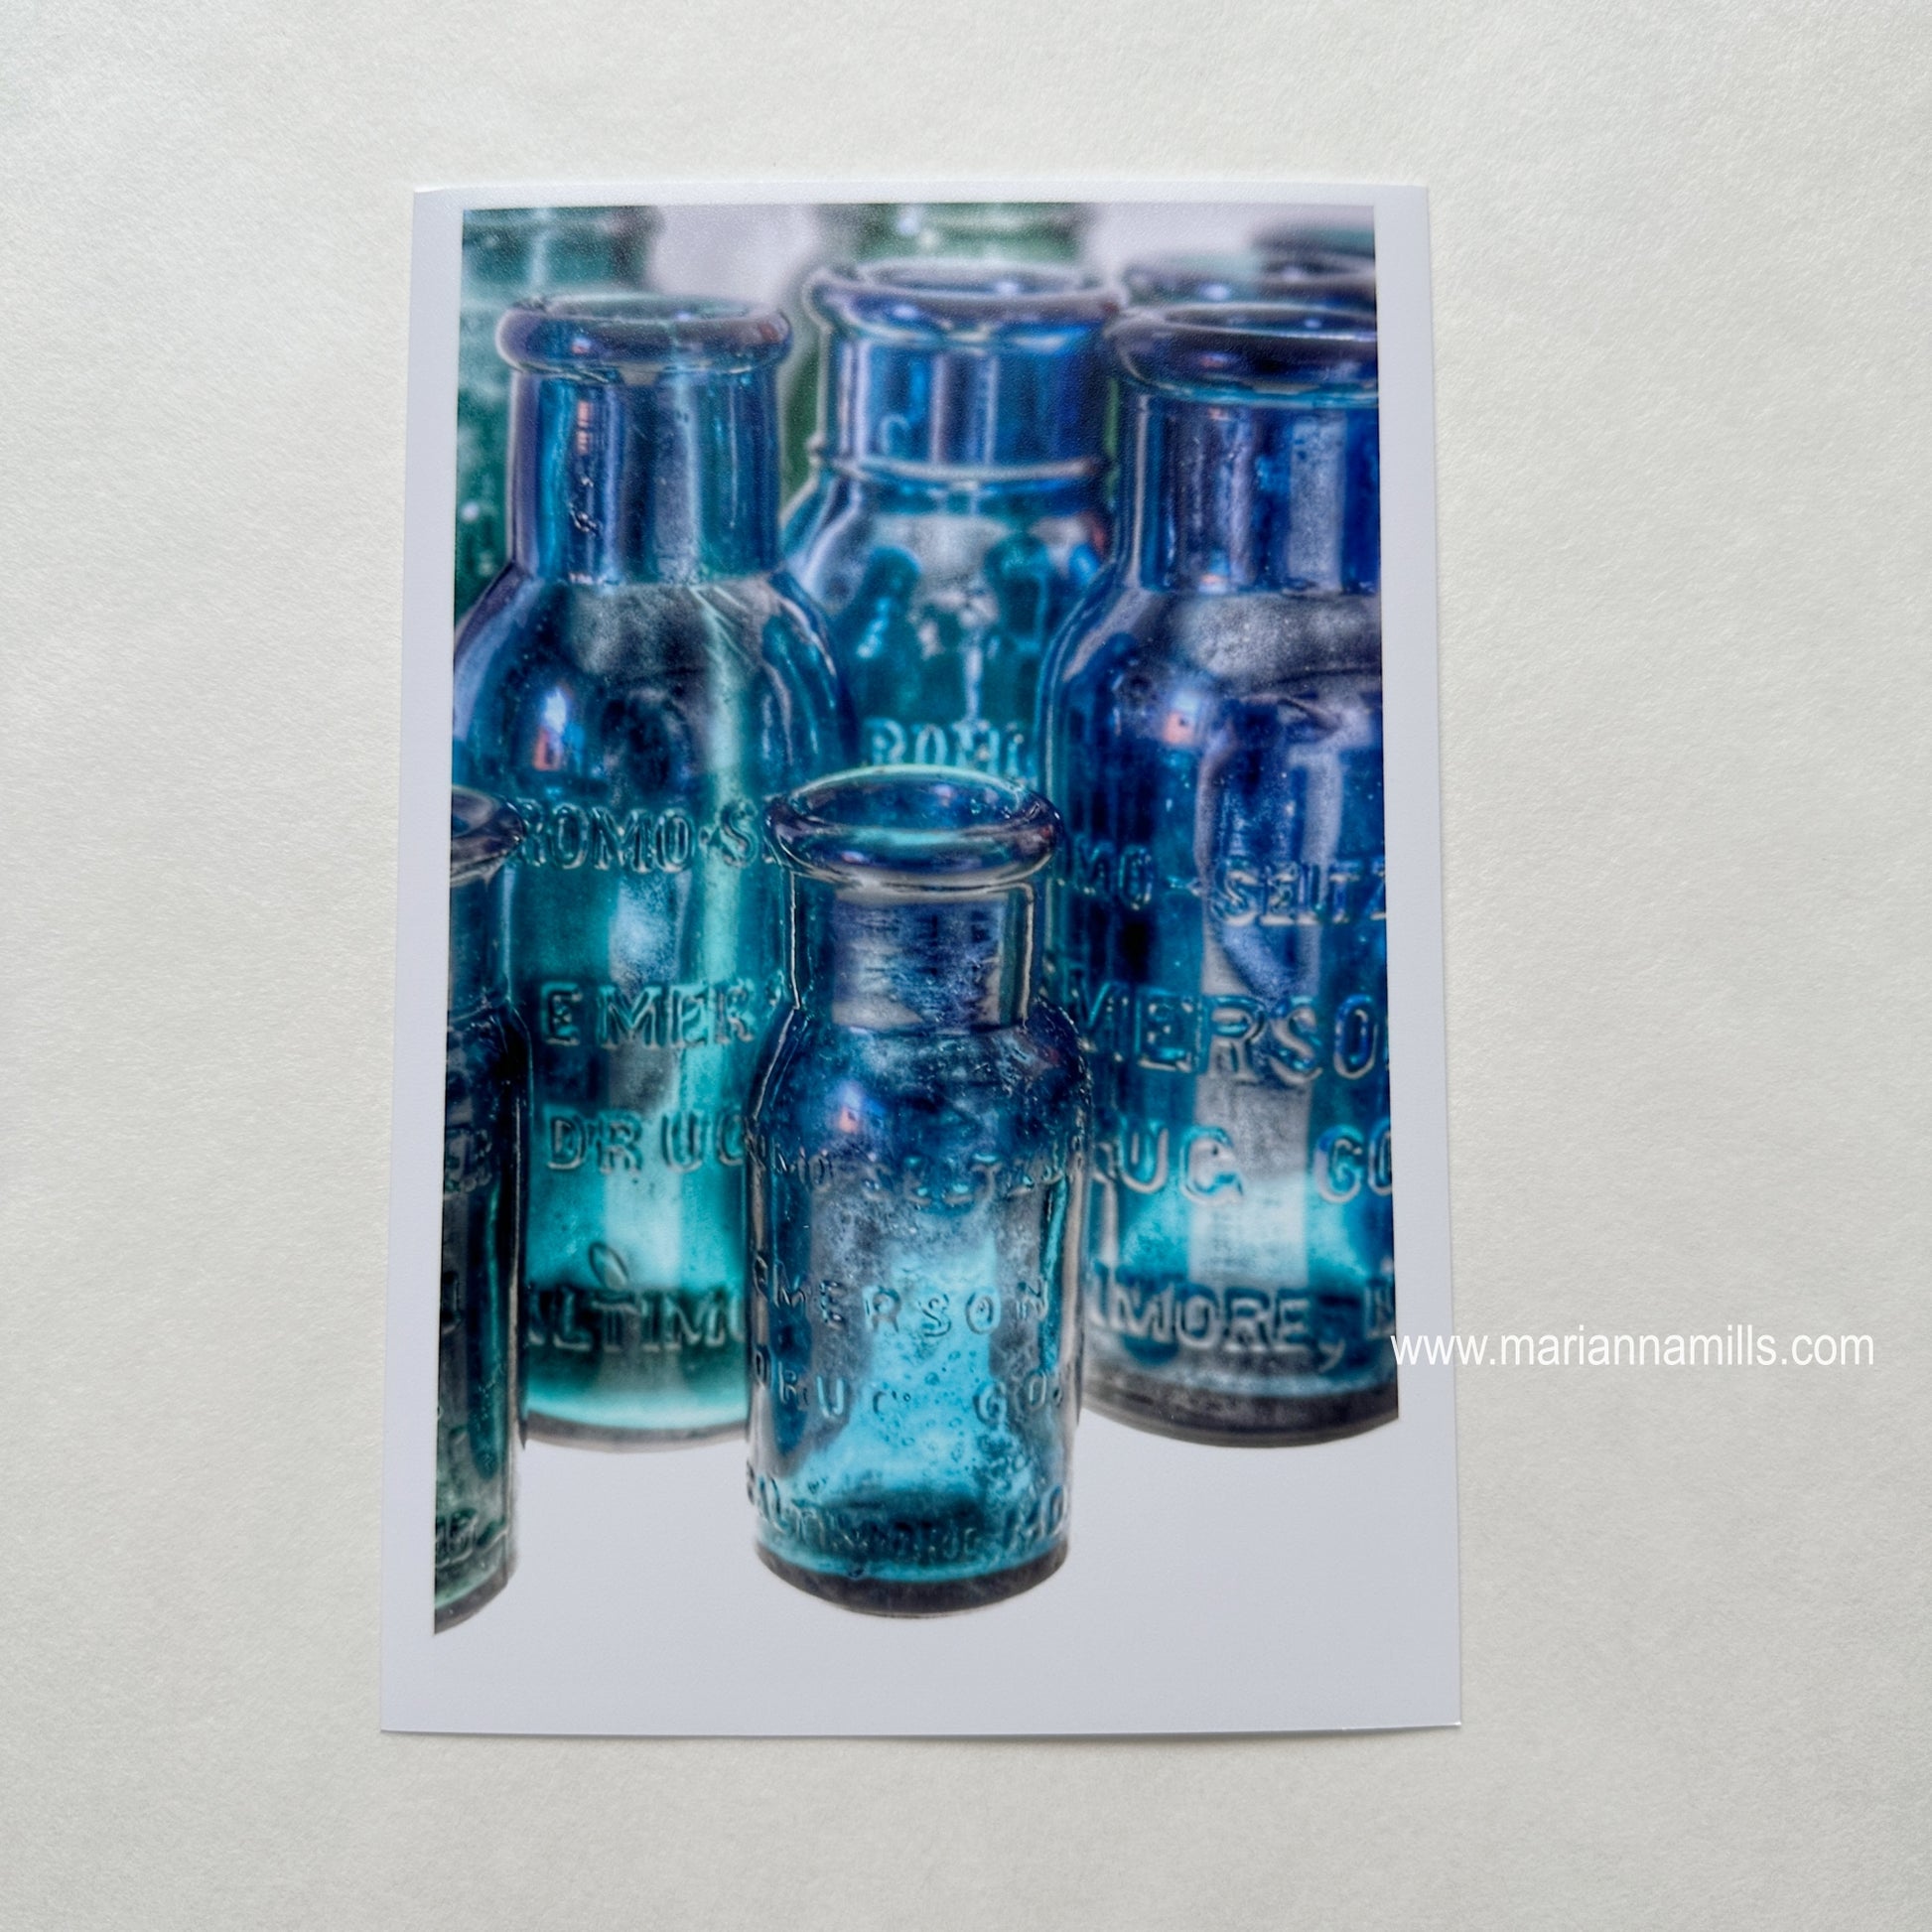 Bromo Seltzer Vintage Glass Bottles Rare Greens Fine Art Photography 4x6 inches by Marianna Mills